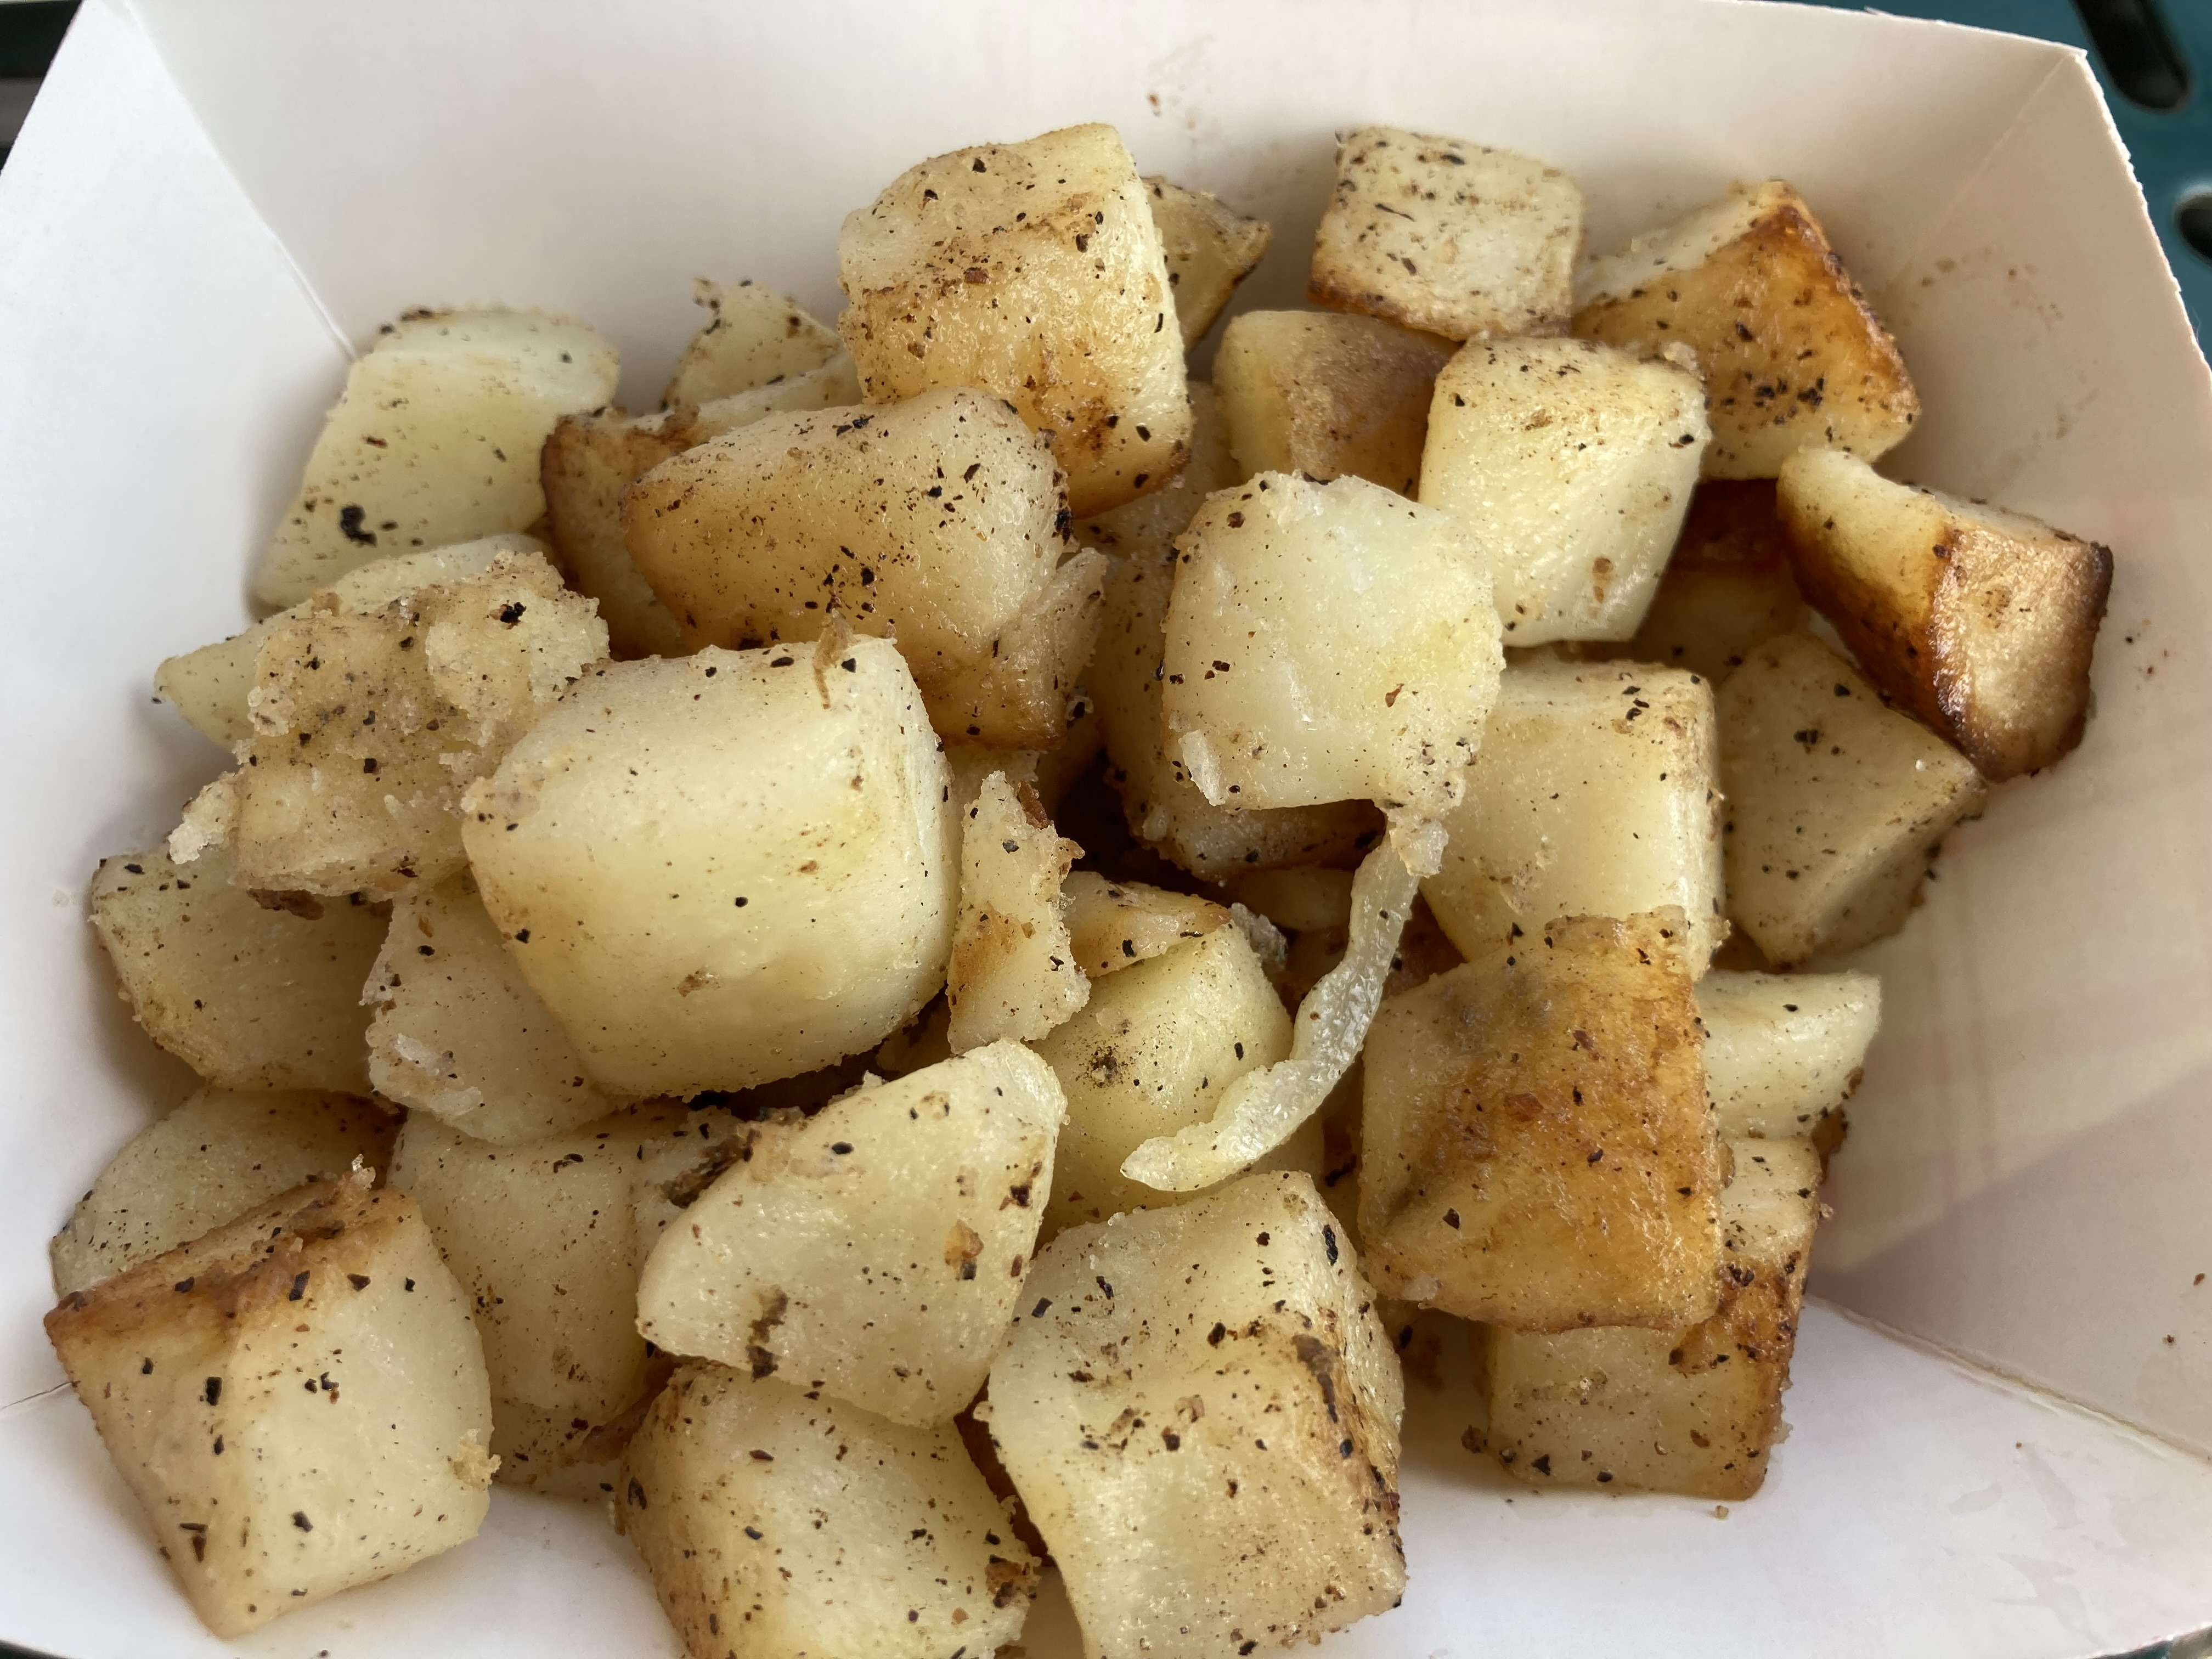 Home fries at JJ's at the New York State Fair.